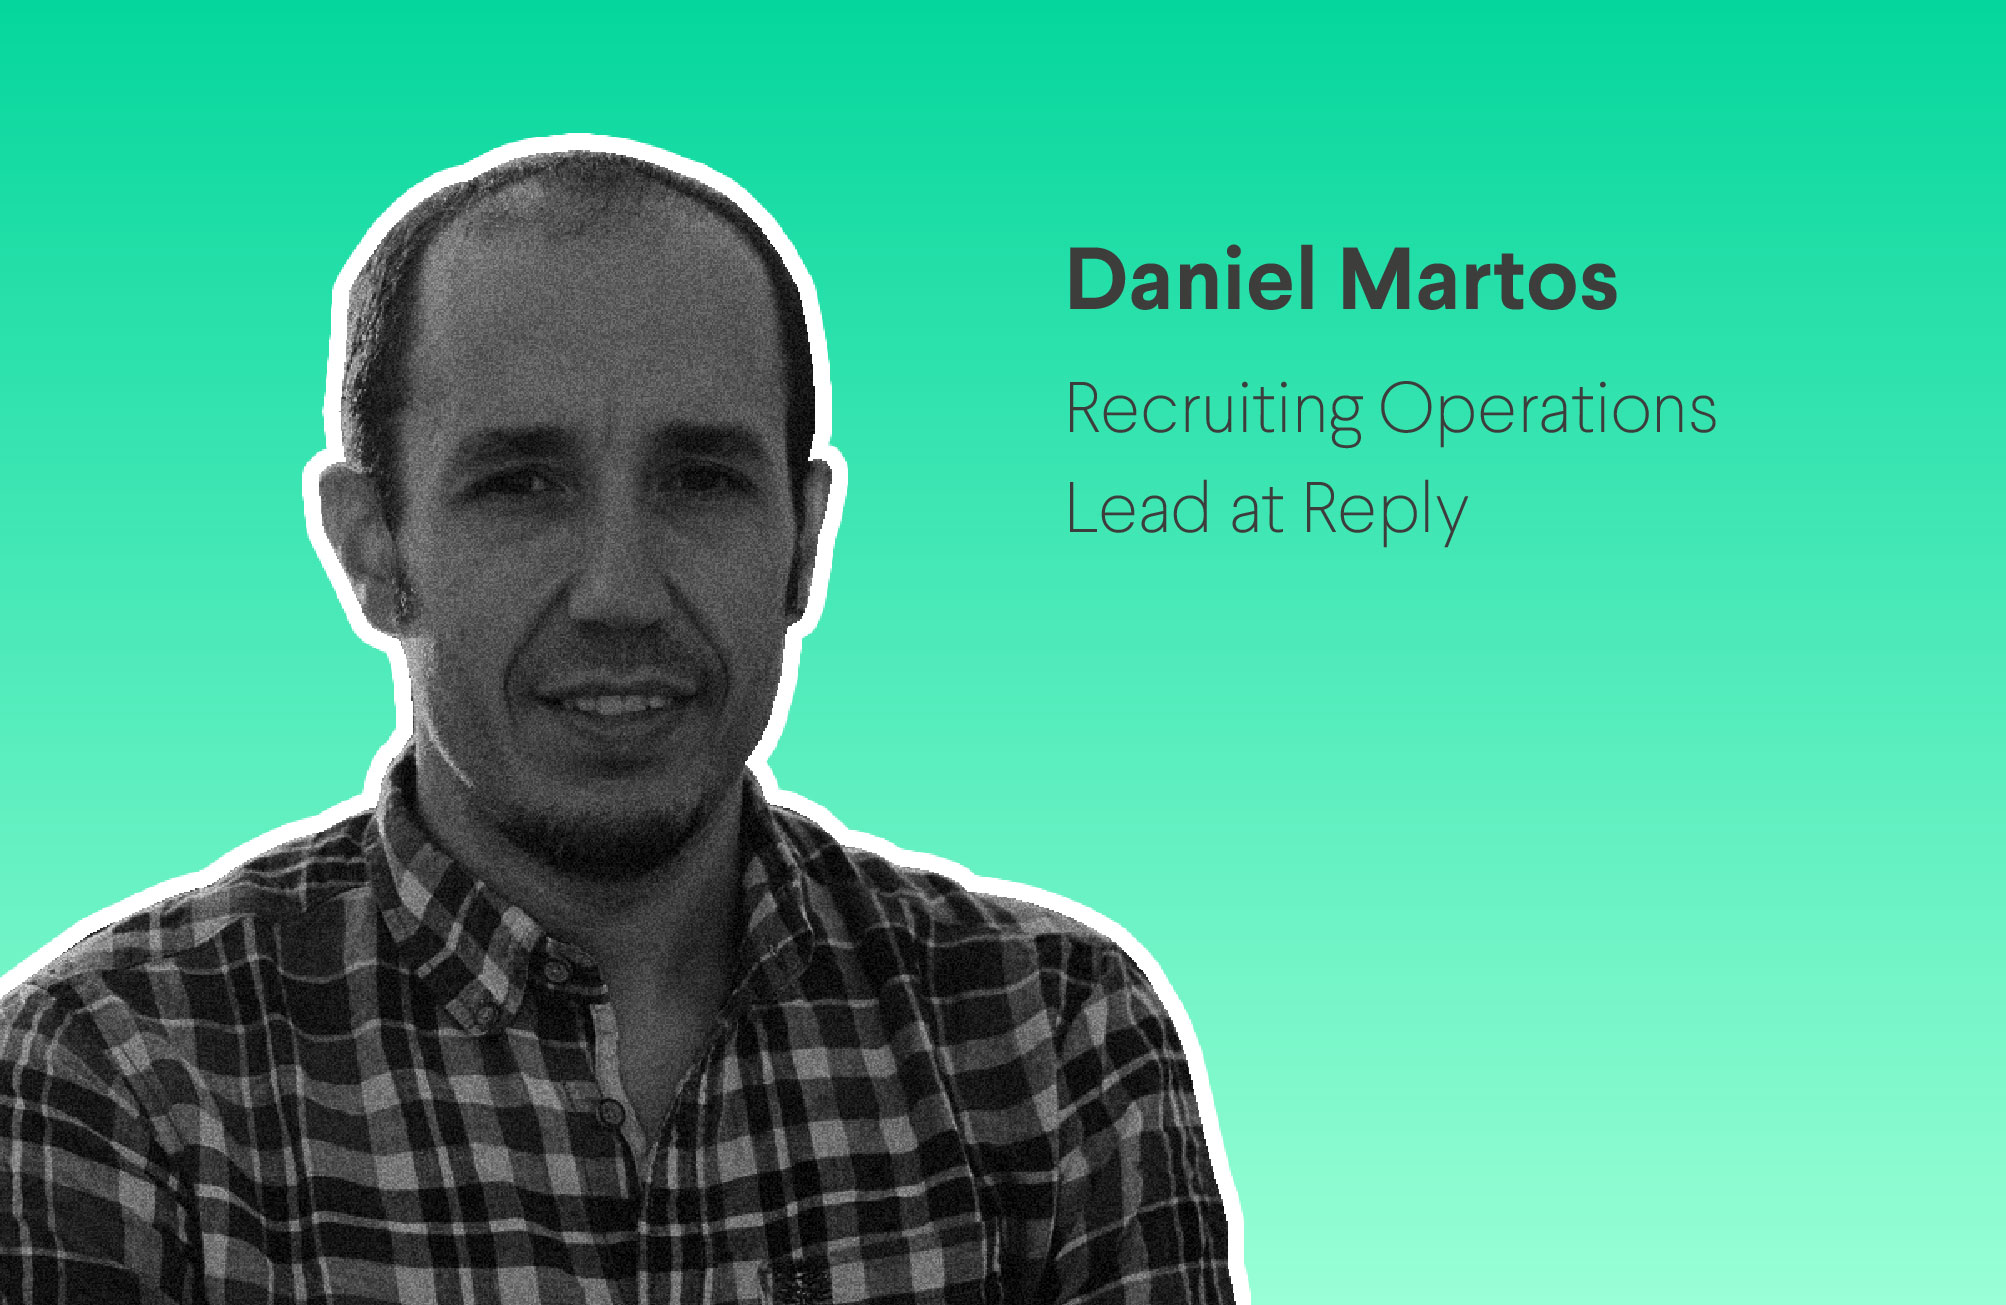 Daniel Martos: “Data and information on labor markets became essential when looking for teams and workers remotely.”